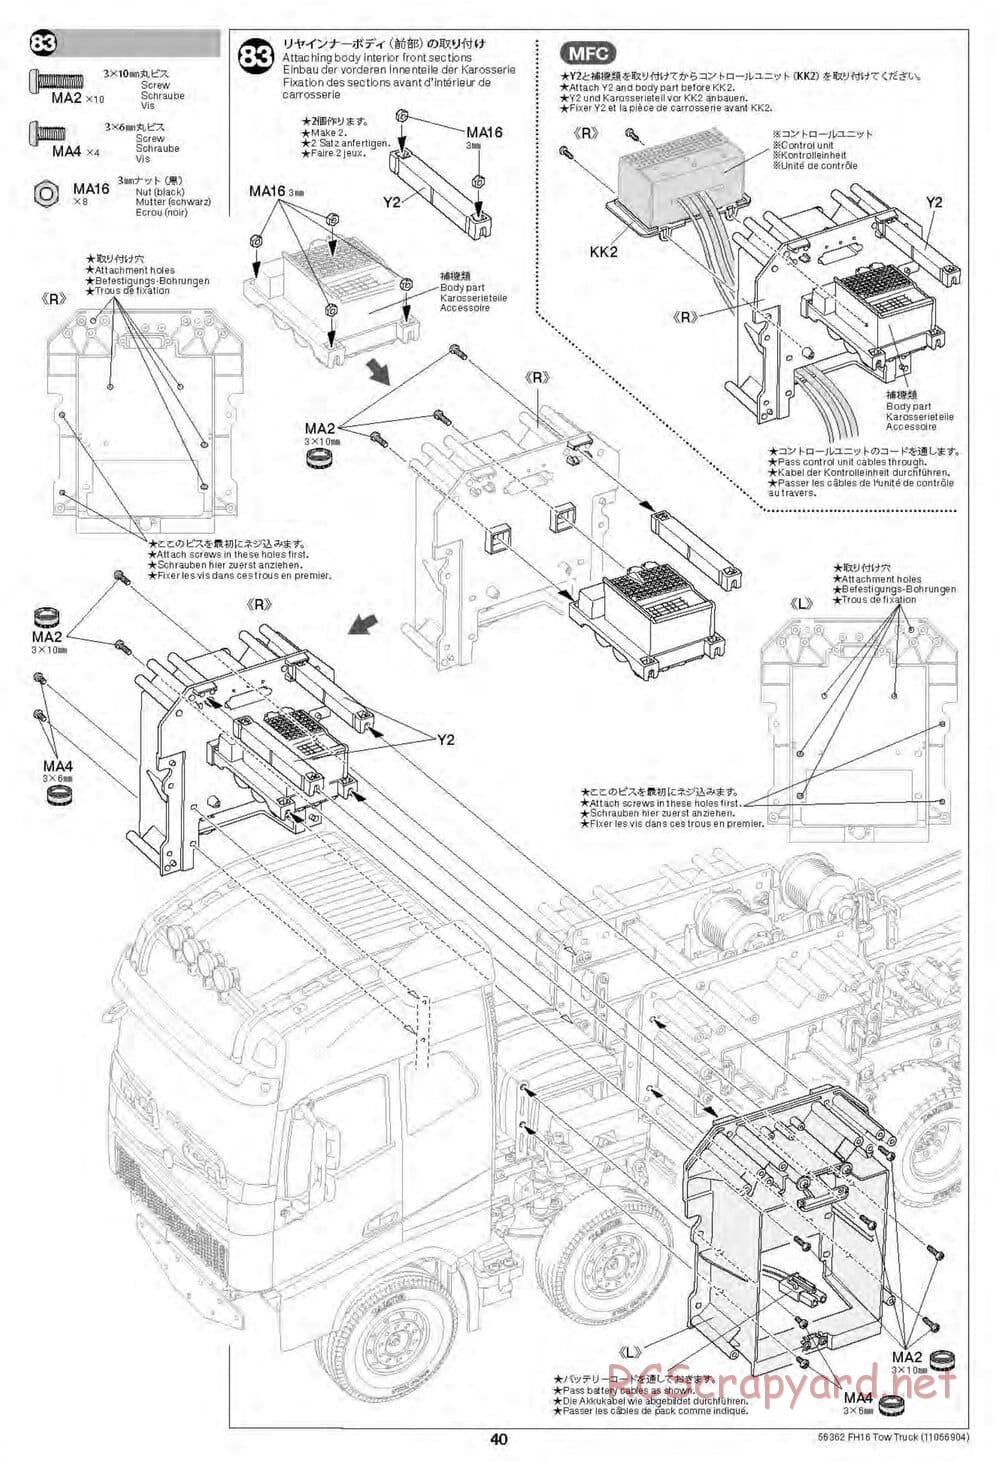 Tamiya - Volvo FH16 Globetrotter 750 8x4 Tow Truck - Manual - Page 40